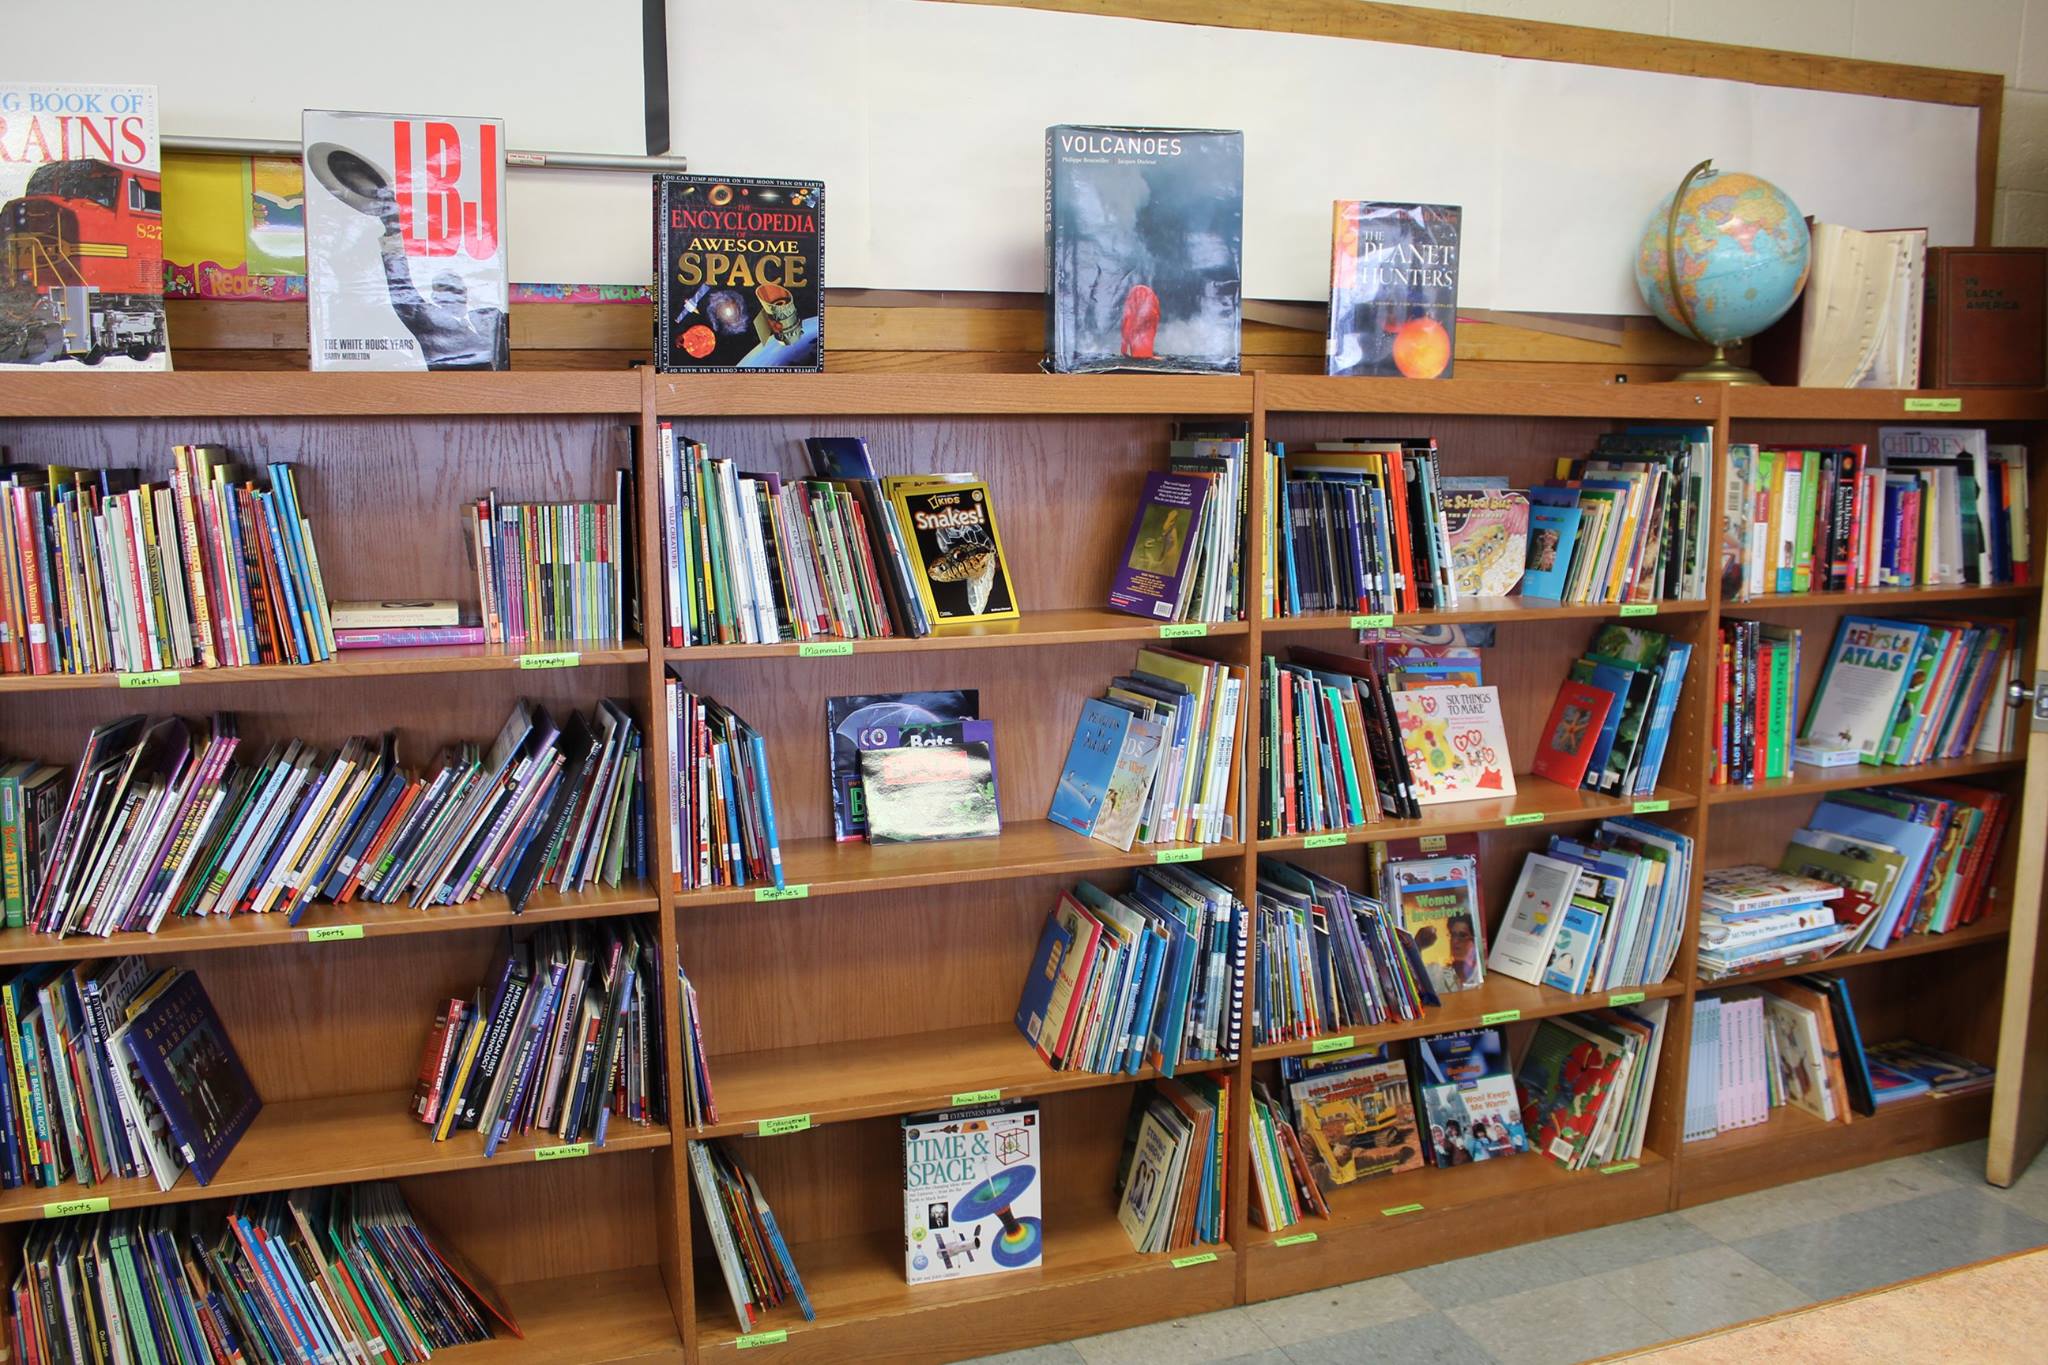 Second Library space created at Edward Gideon Elementary